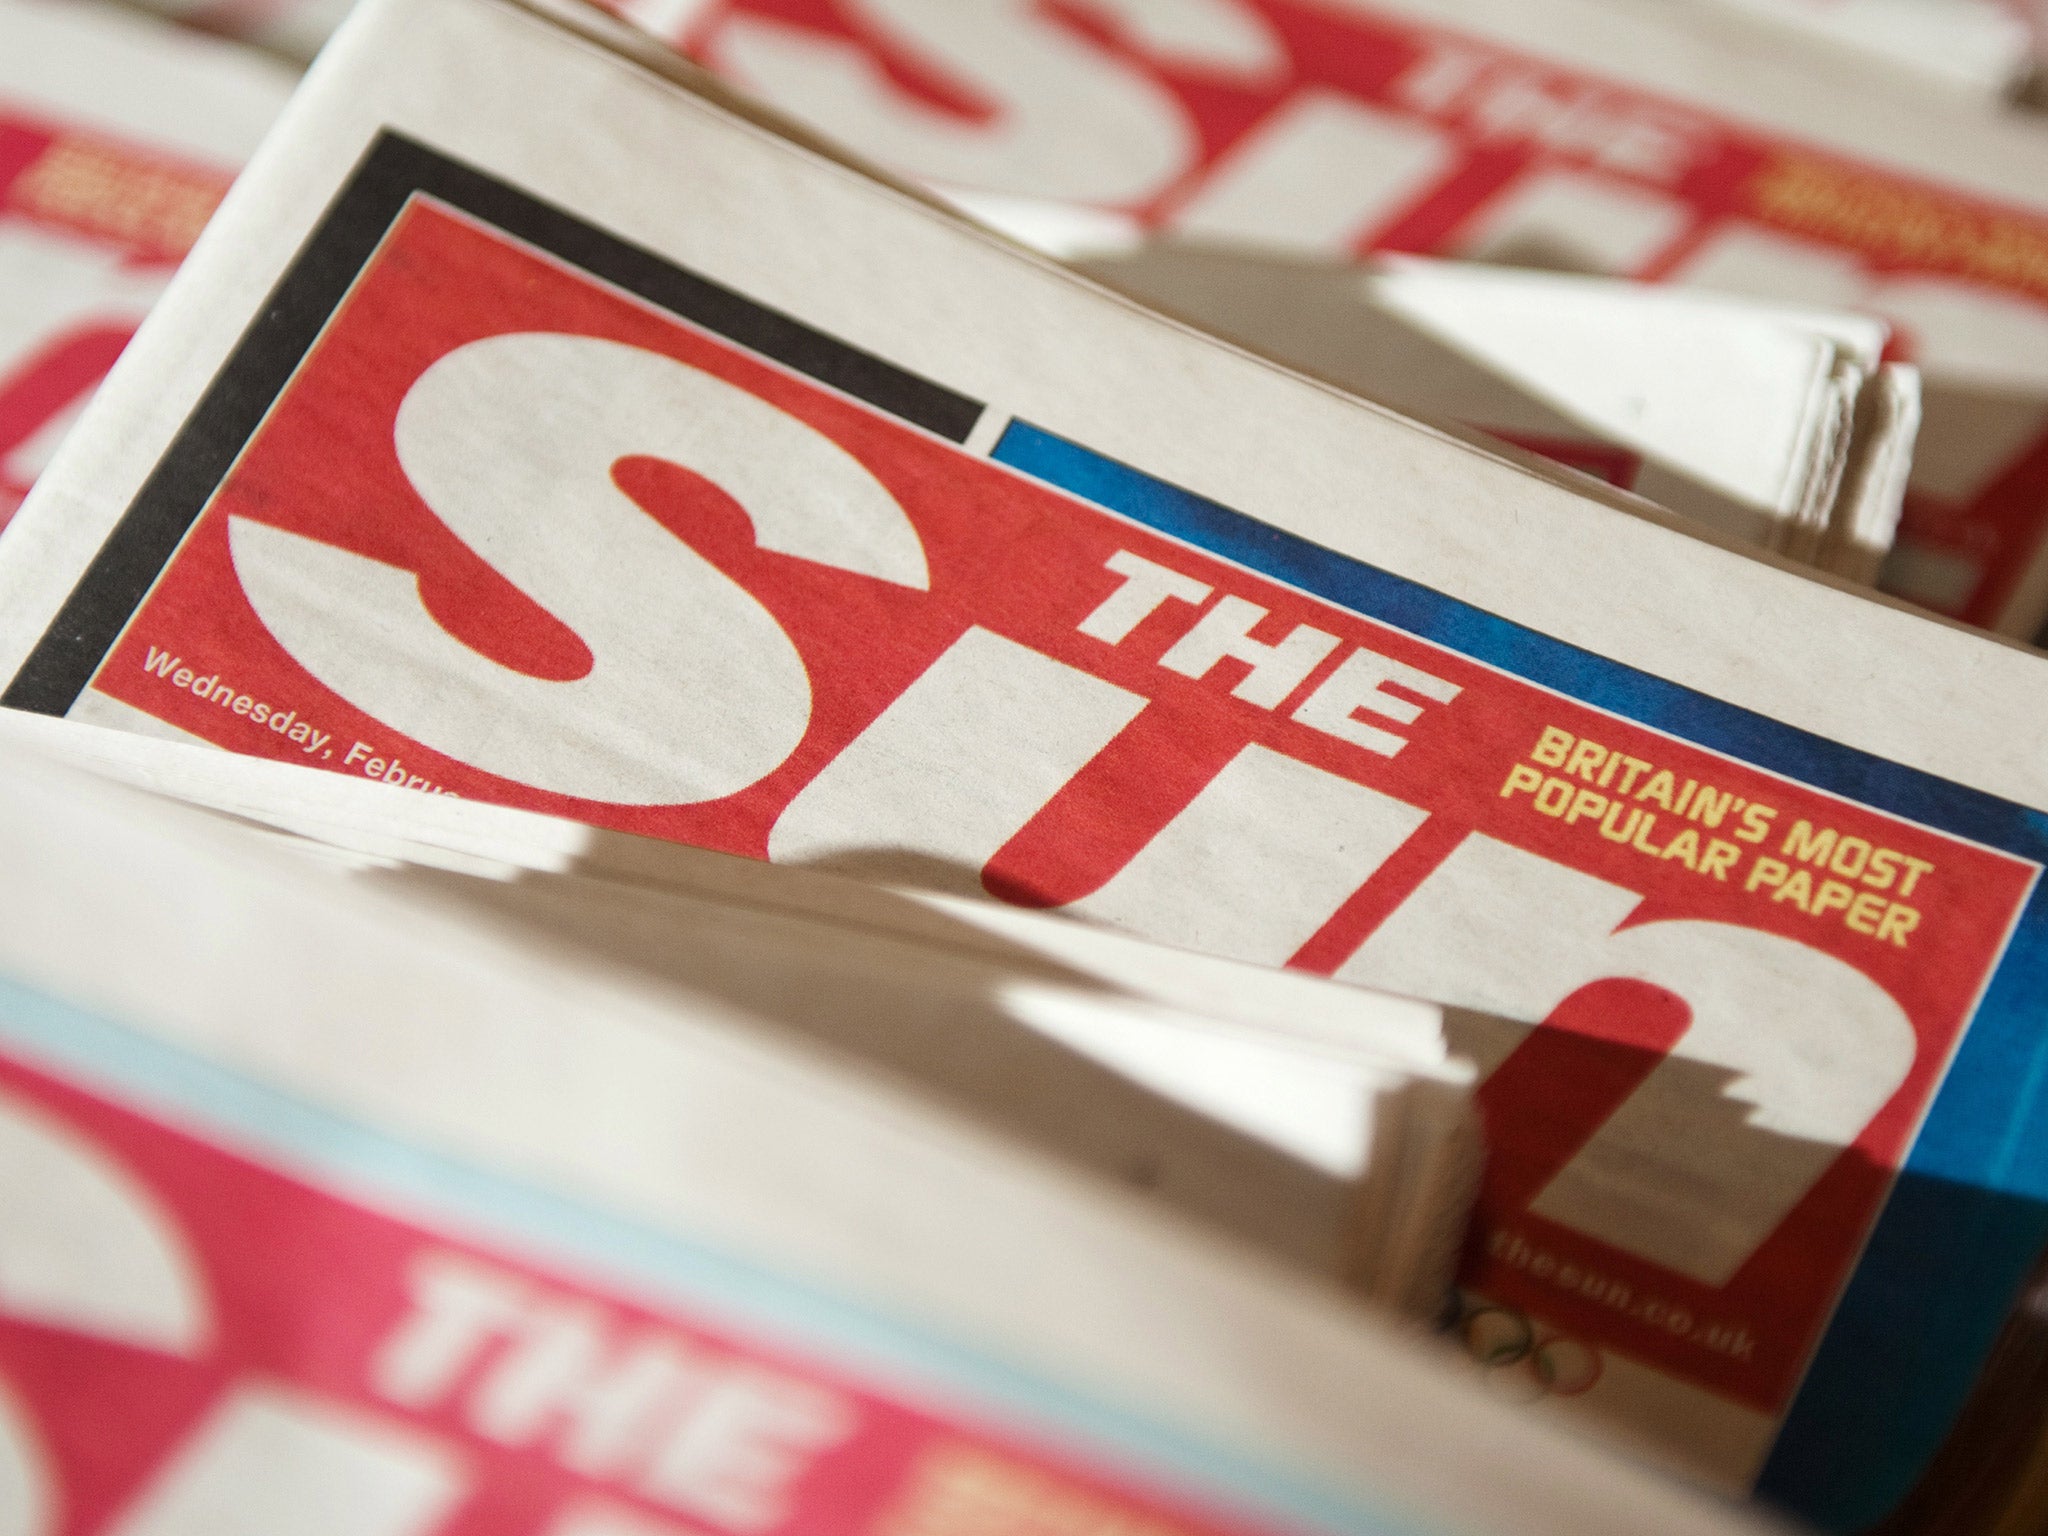 News Group Newspapers has always said that there was no hacking activity at The Sun (Getty)